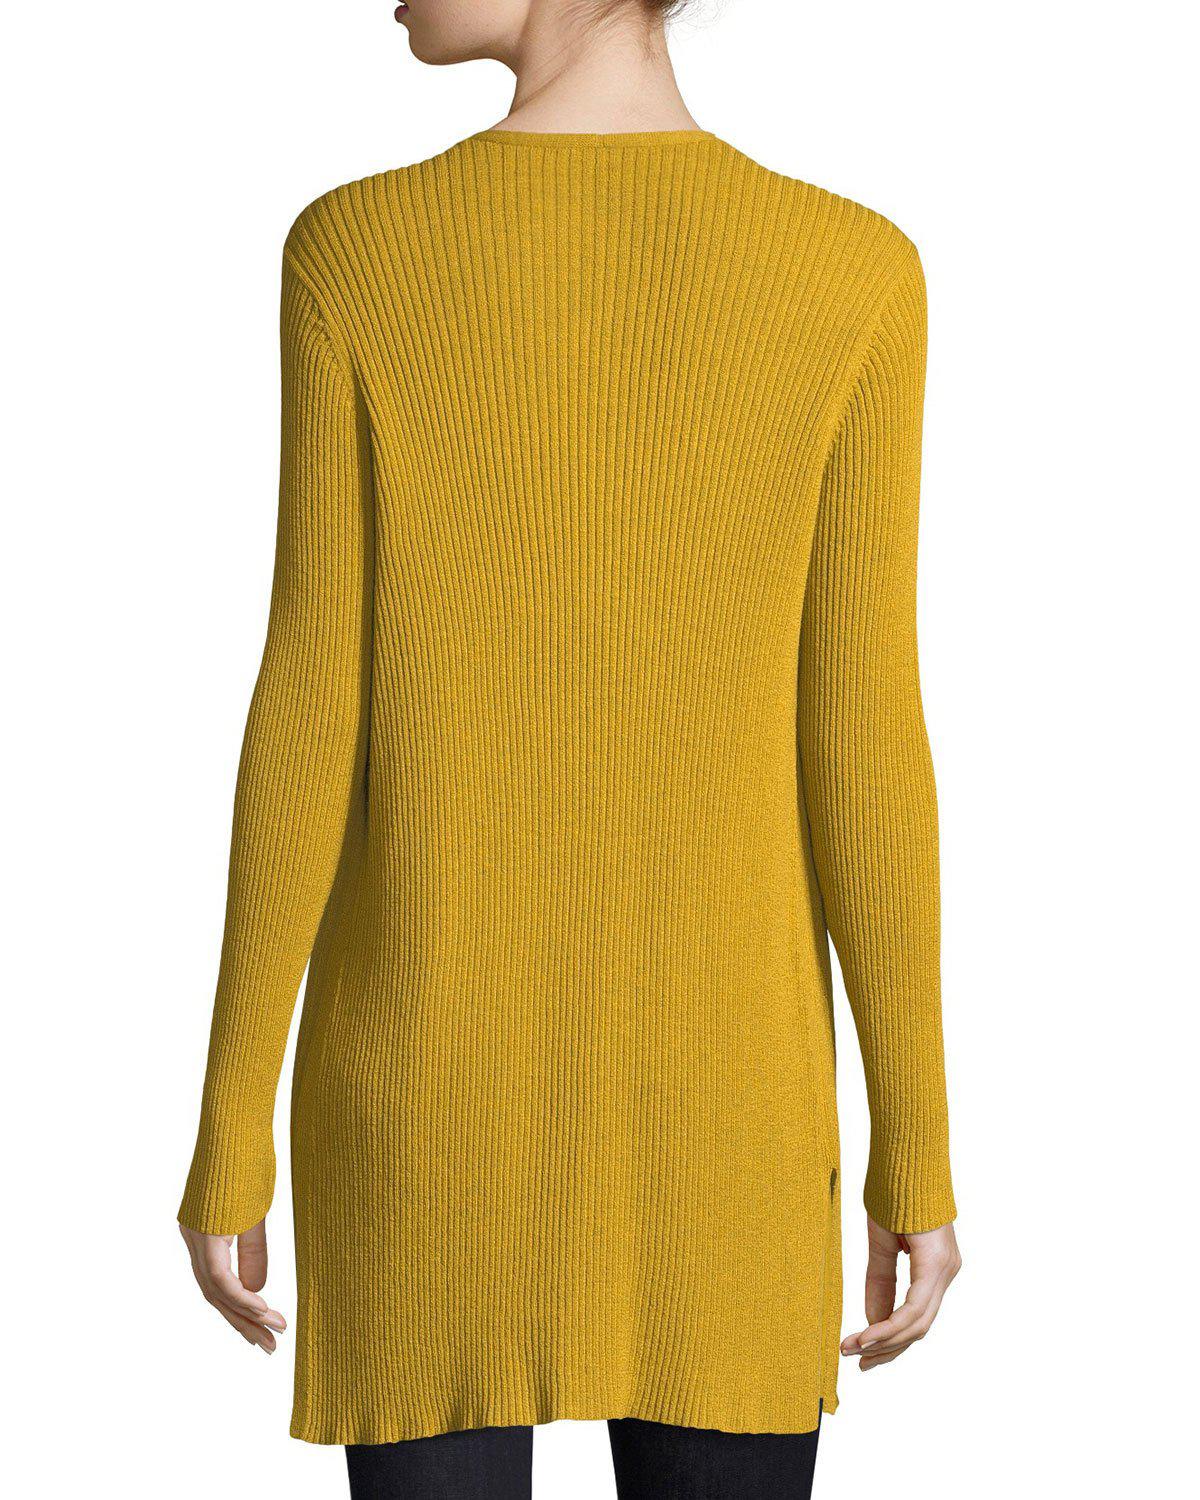 Eileen Fisher Long Straight Wool Crepe Cardigan in Yellow - Lyst